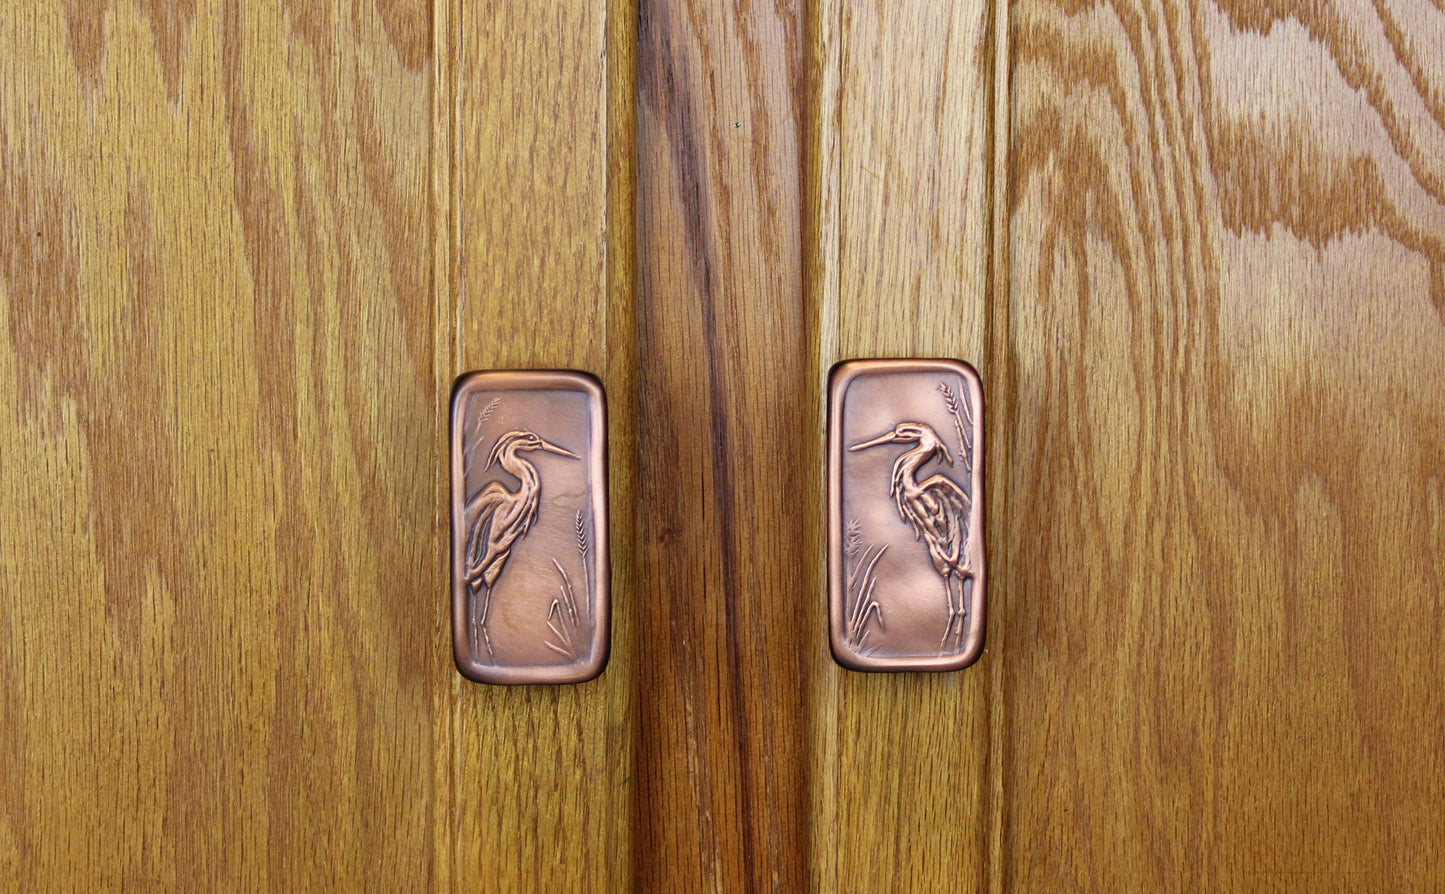 Deer Cabinet Pull, Copper, Facing Right, 1.5" x 3"